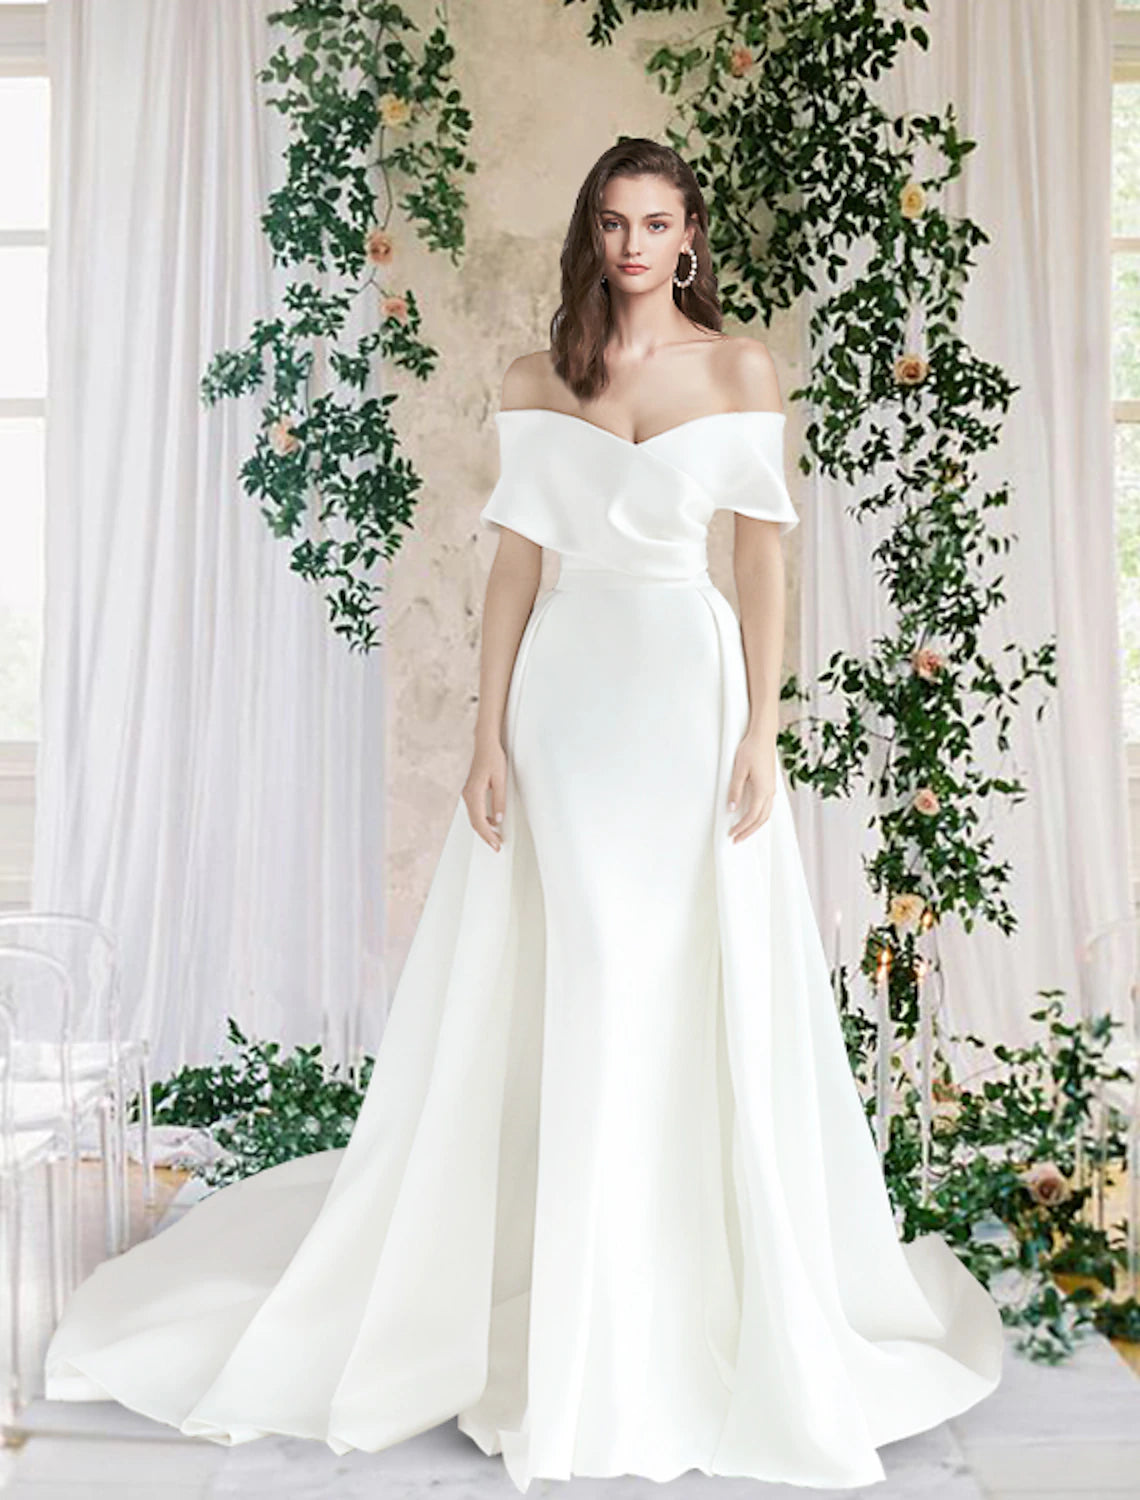 Hall Casual Wedding Dresses Sheath / Column Off Shoulder Cap Sleeve Chapel Train Satin Bridal Gowns With Ruched